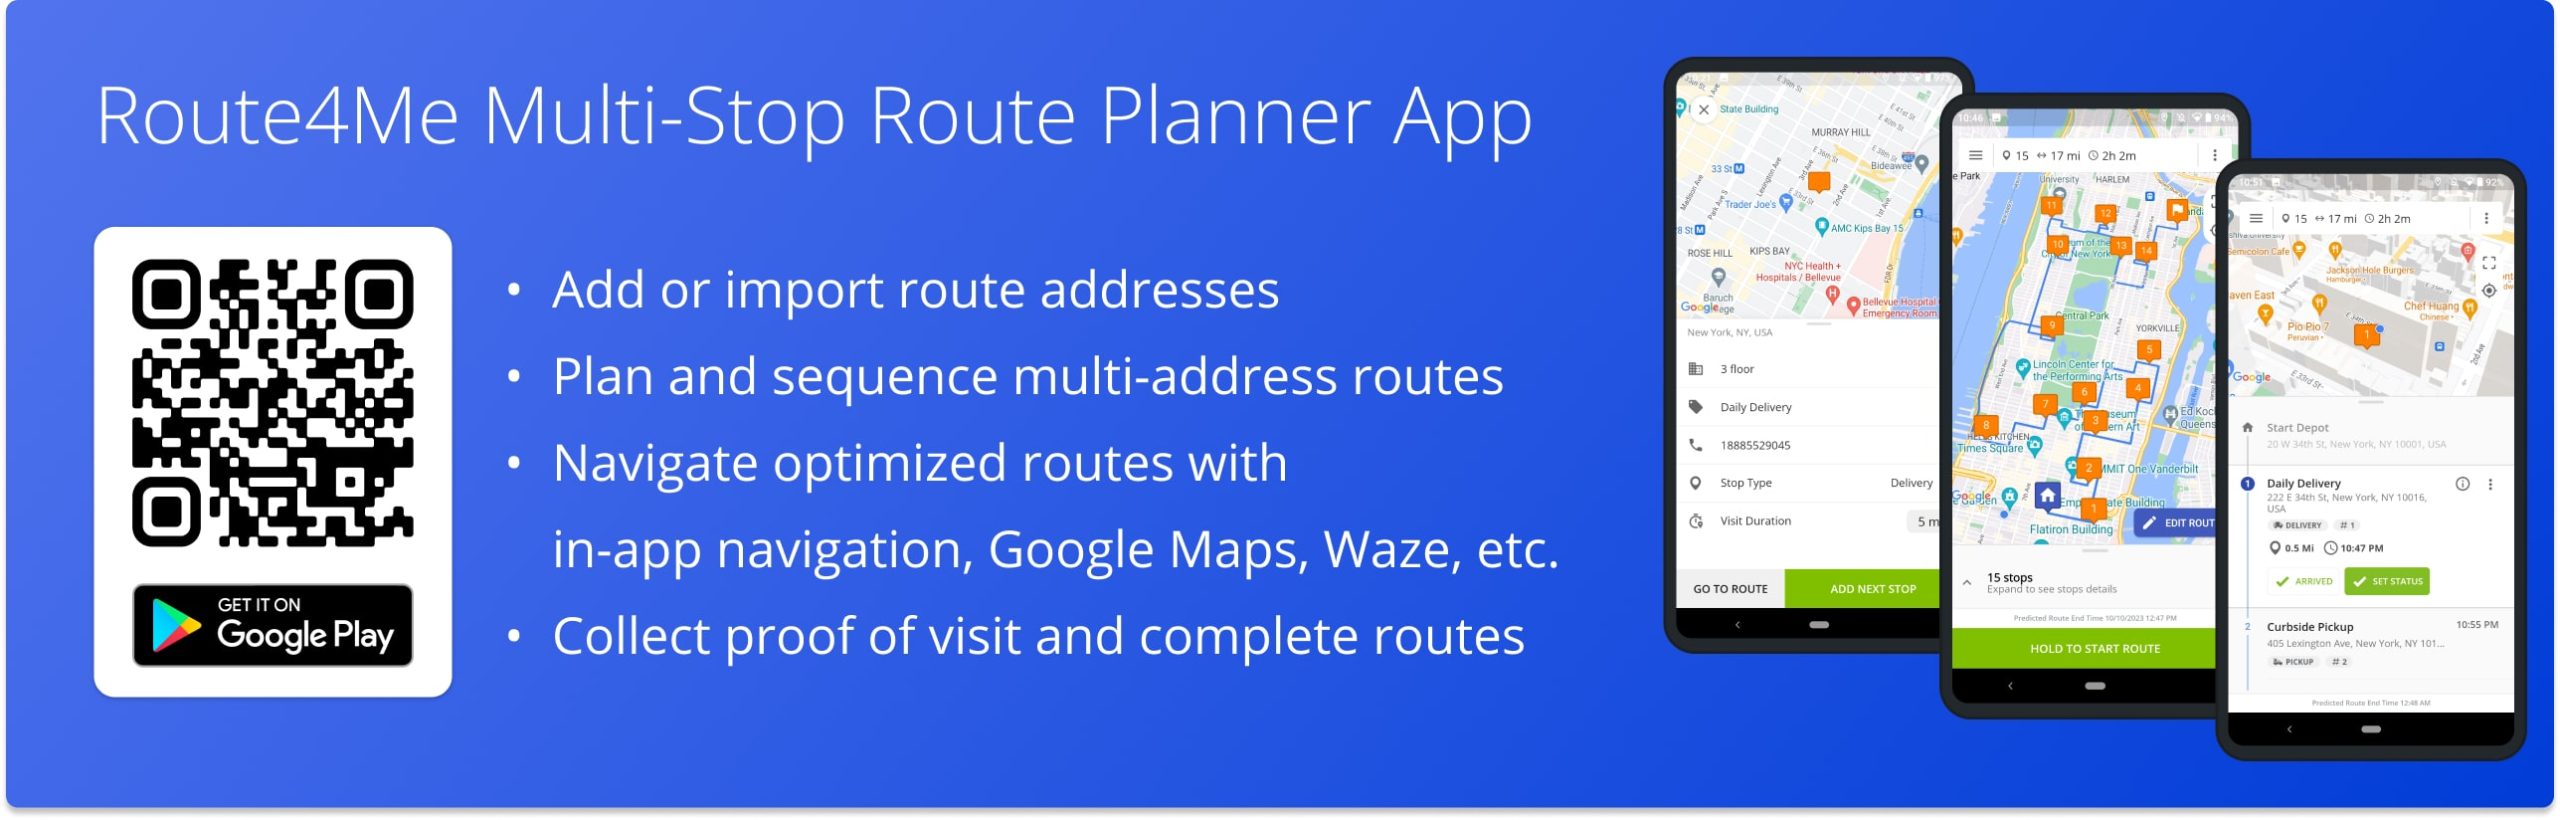 Download and install Route4Me's multi-stop route planner app for delivery drivers on Android phone and tablet.